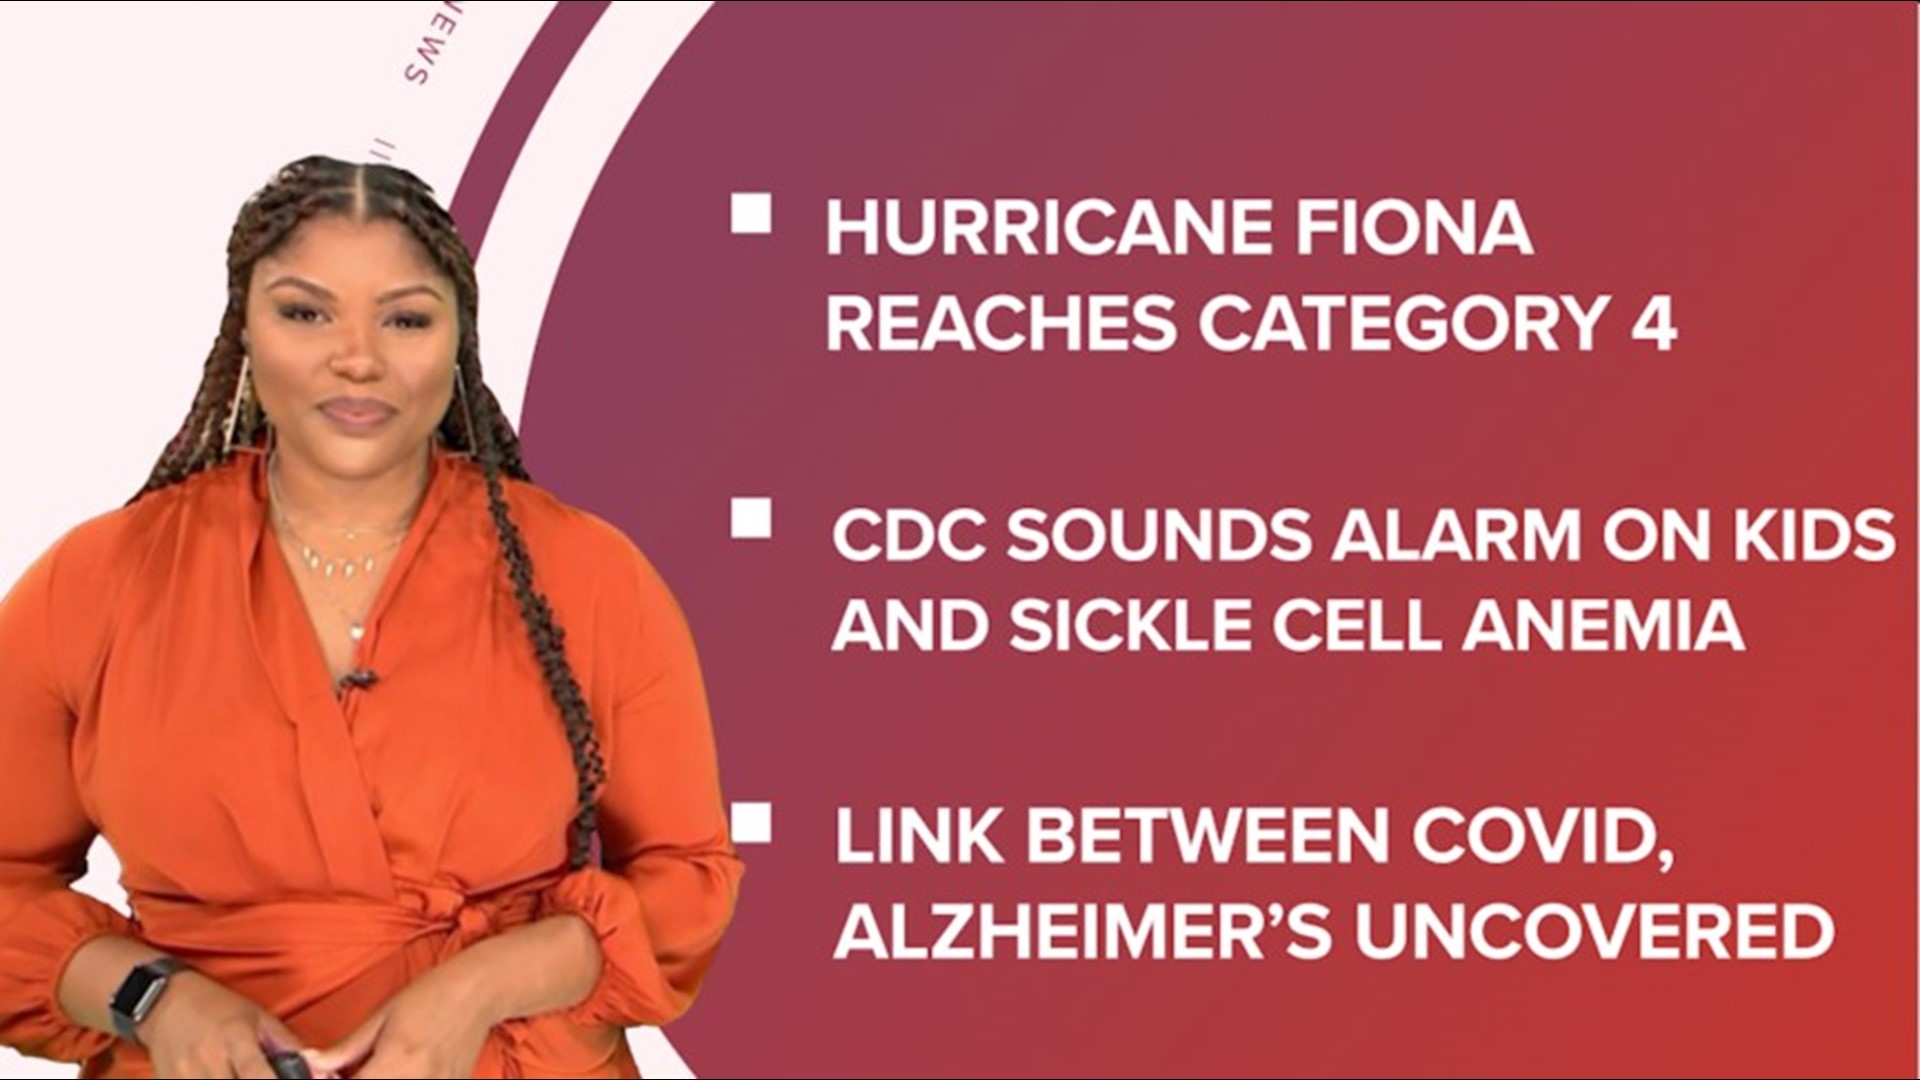 A look at what is happening in the news from Hurricane Fiona reaching Category 4 status to a link between Covid and Alzheimer's disease.